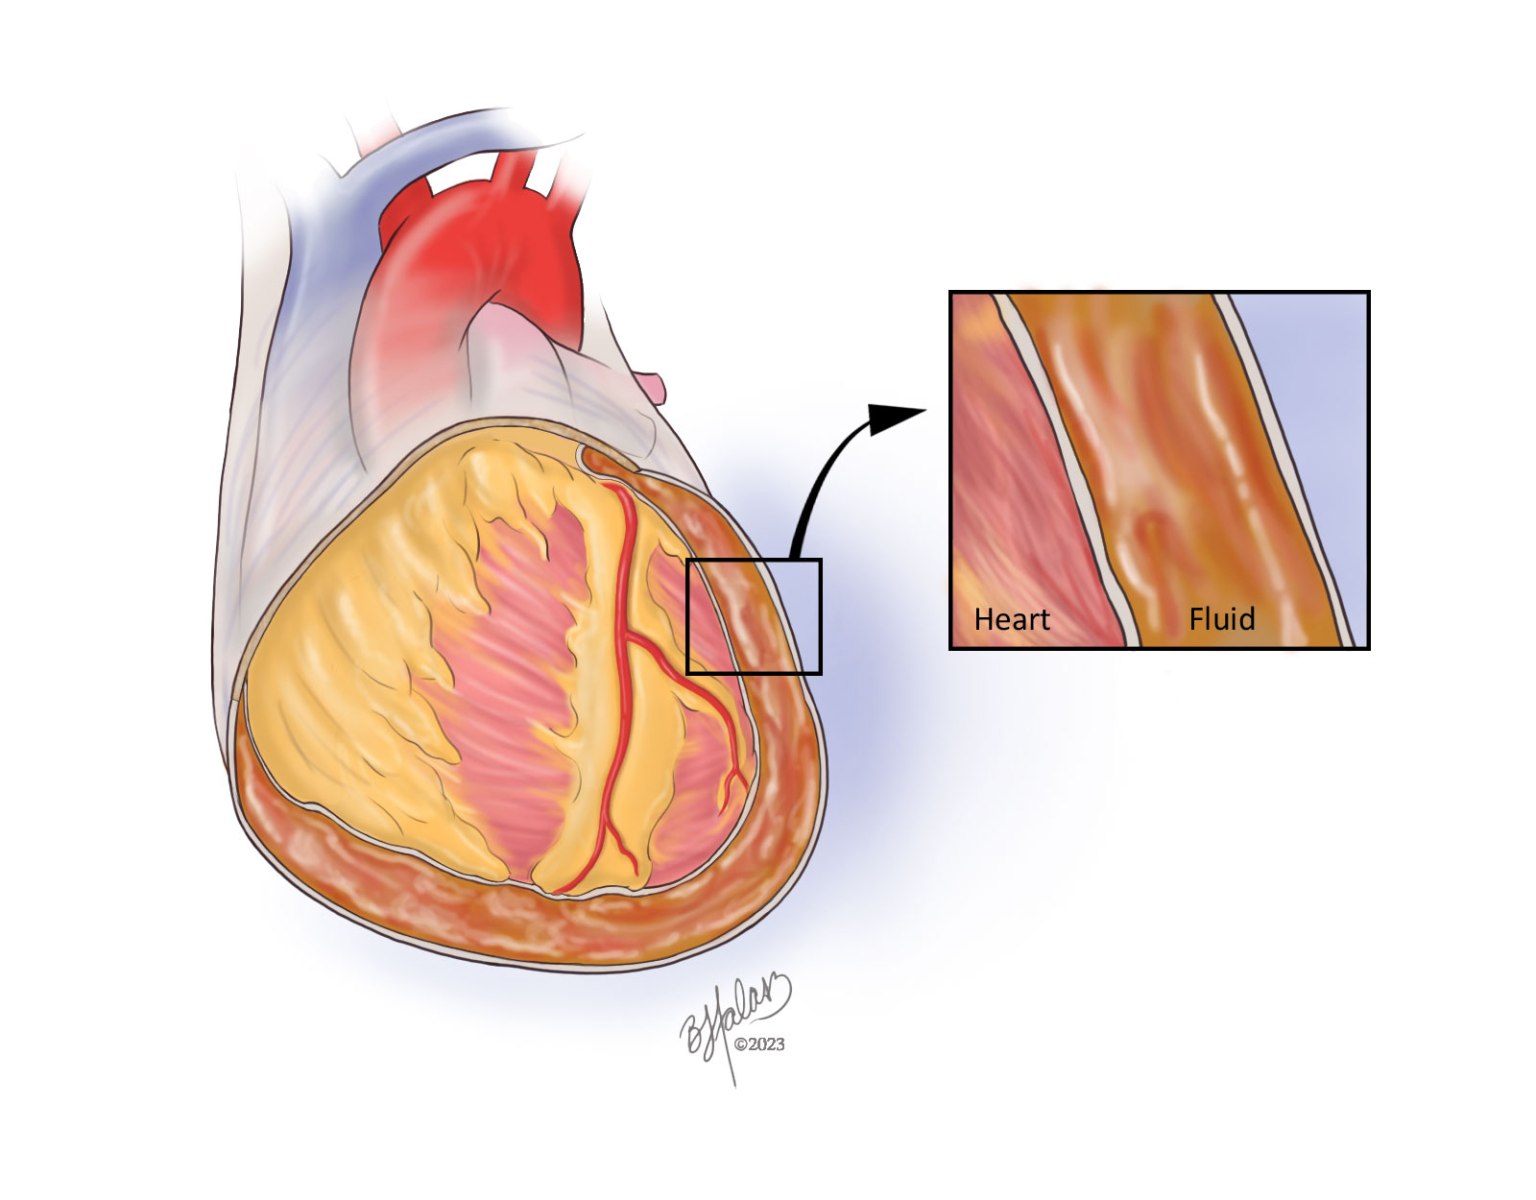 heart with pericardial effusion